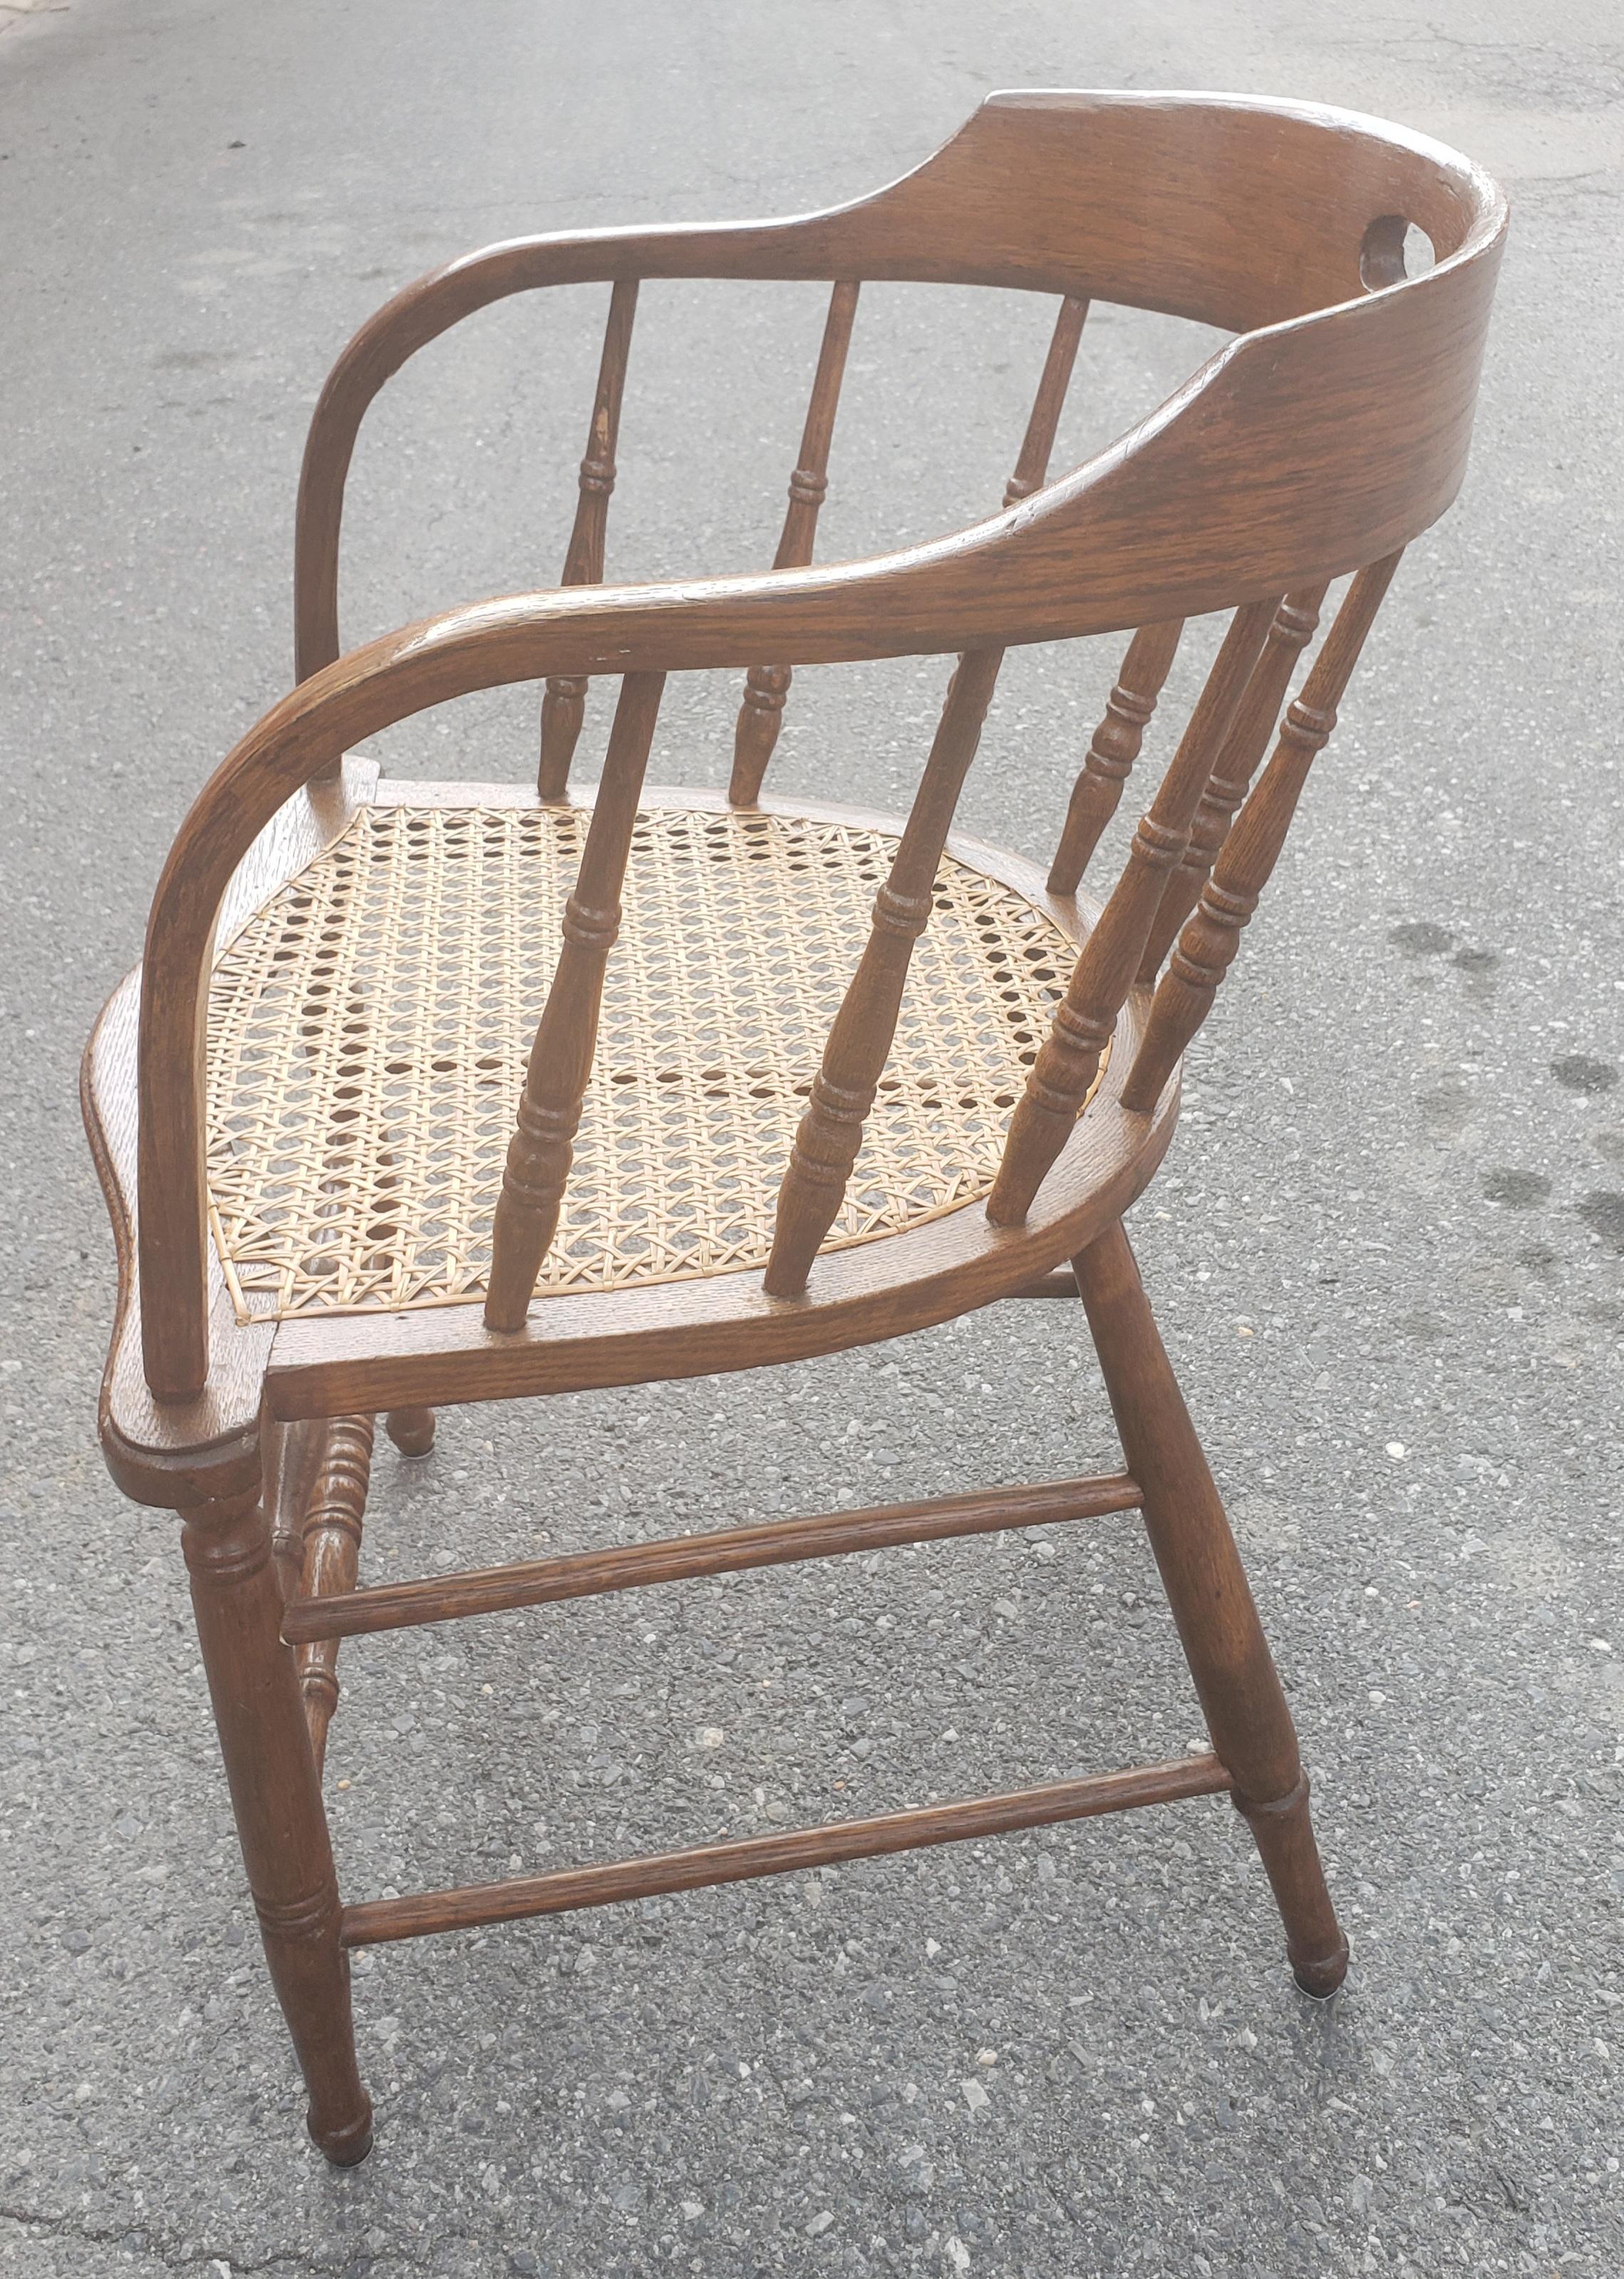 Antique Barrel Back Firehouse Windsor Chair with Cane Seat 8